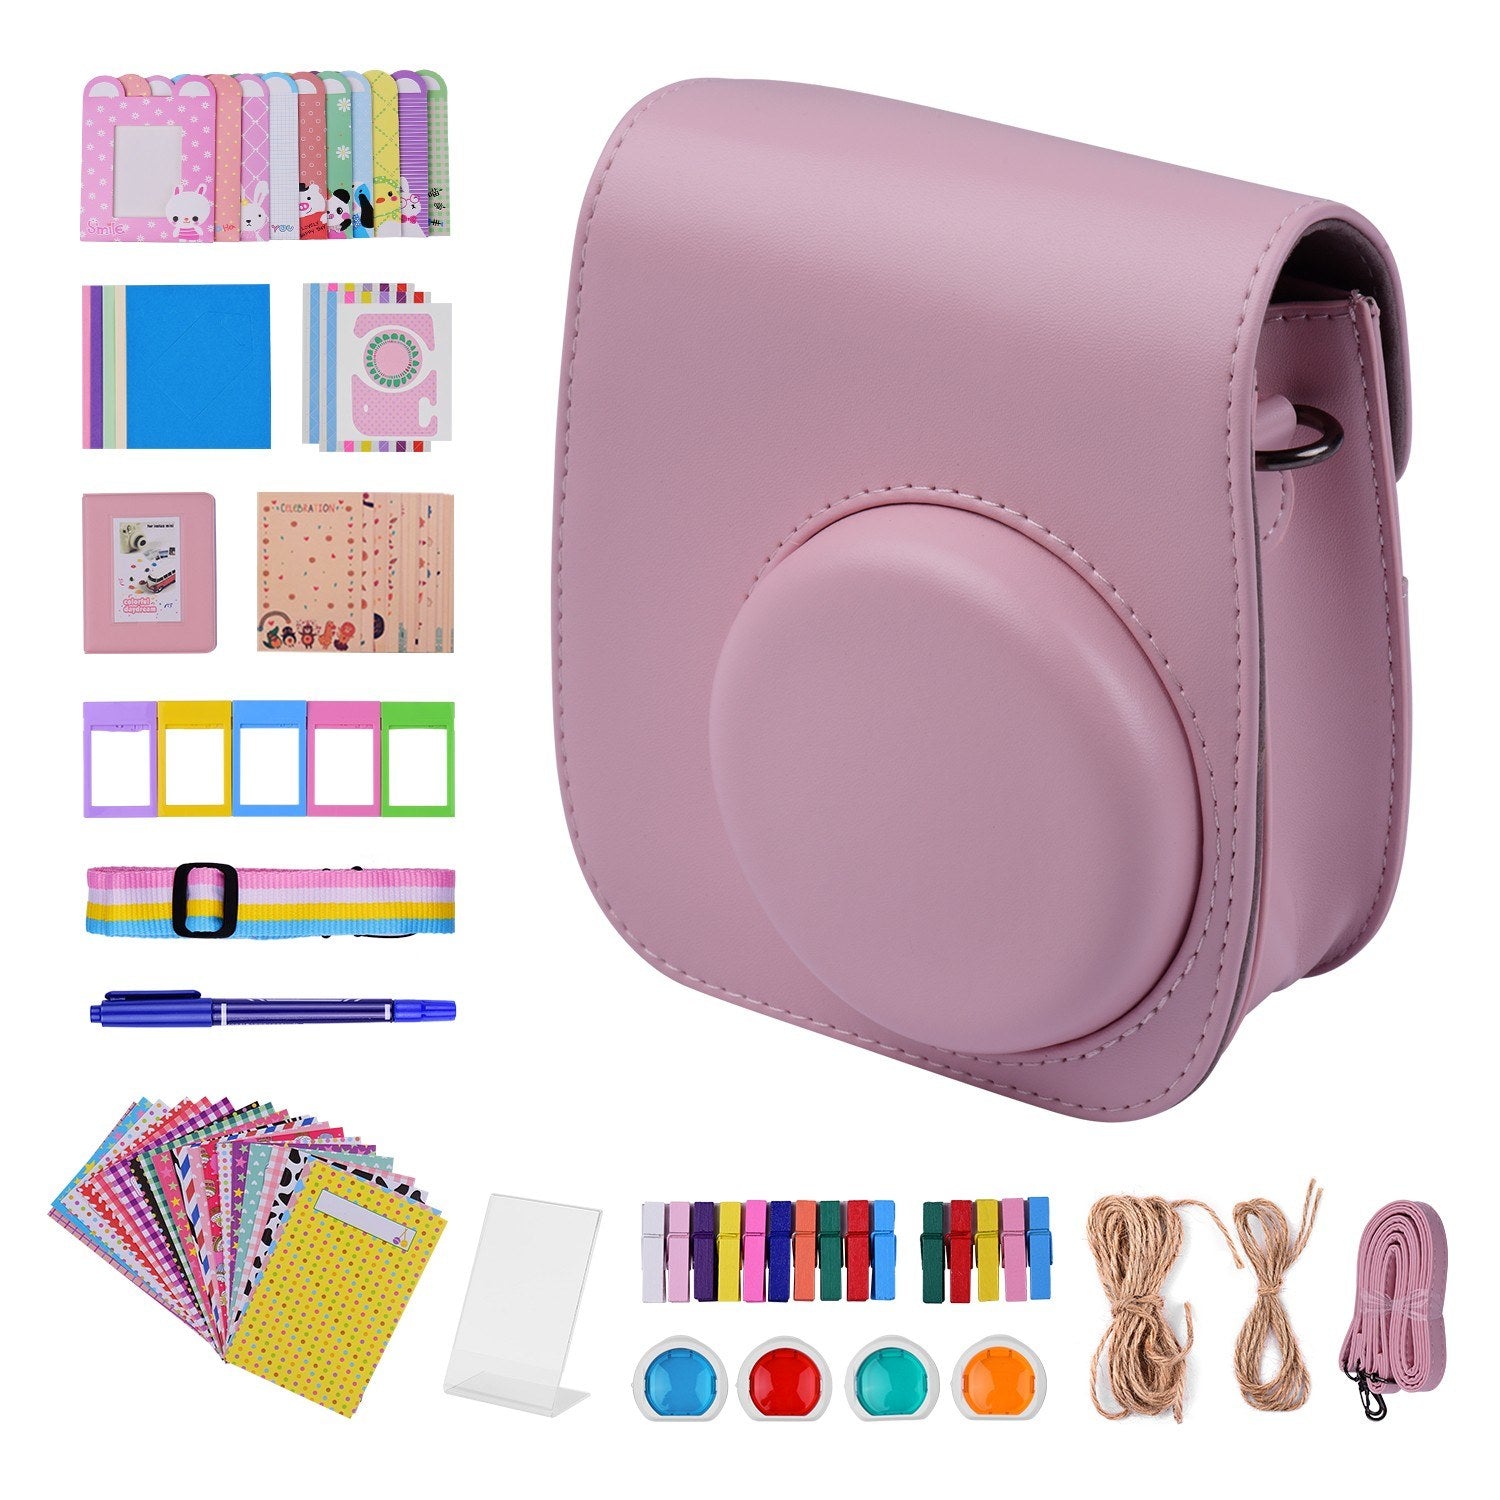 12-in-1 Instant Camera Accessories Bundle Kit for Fujifilm Instax Mini 11, Photography Scrapbook Kit Instant Camera Gifts - Pink